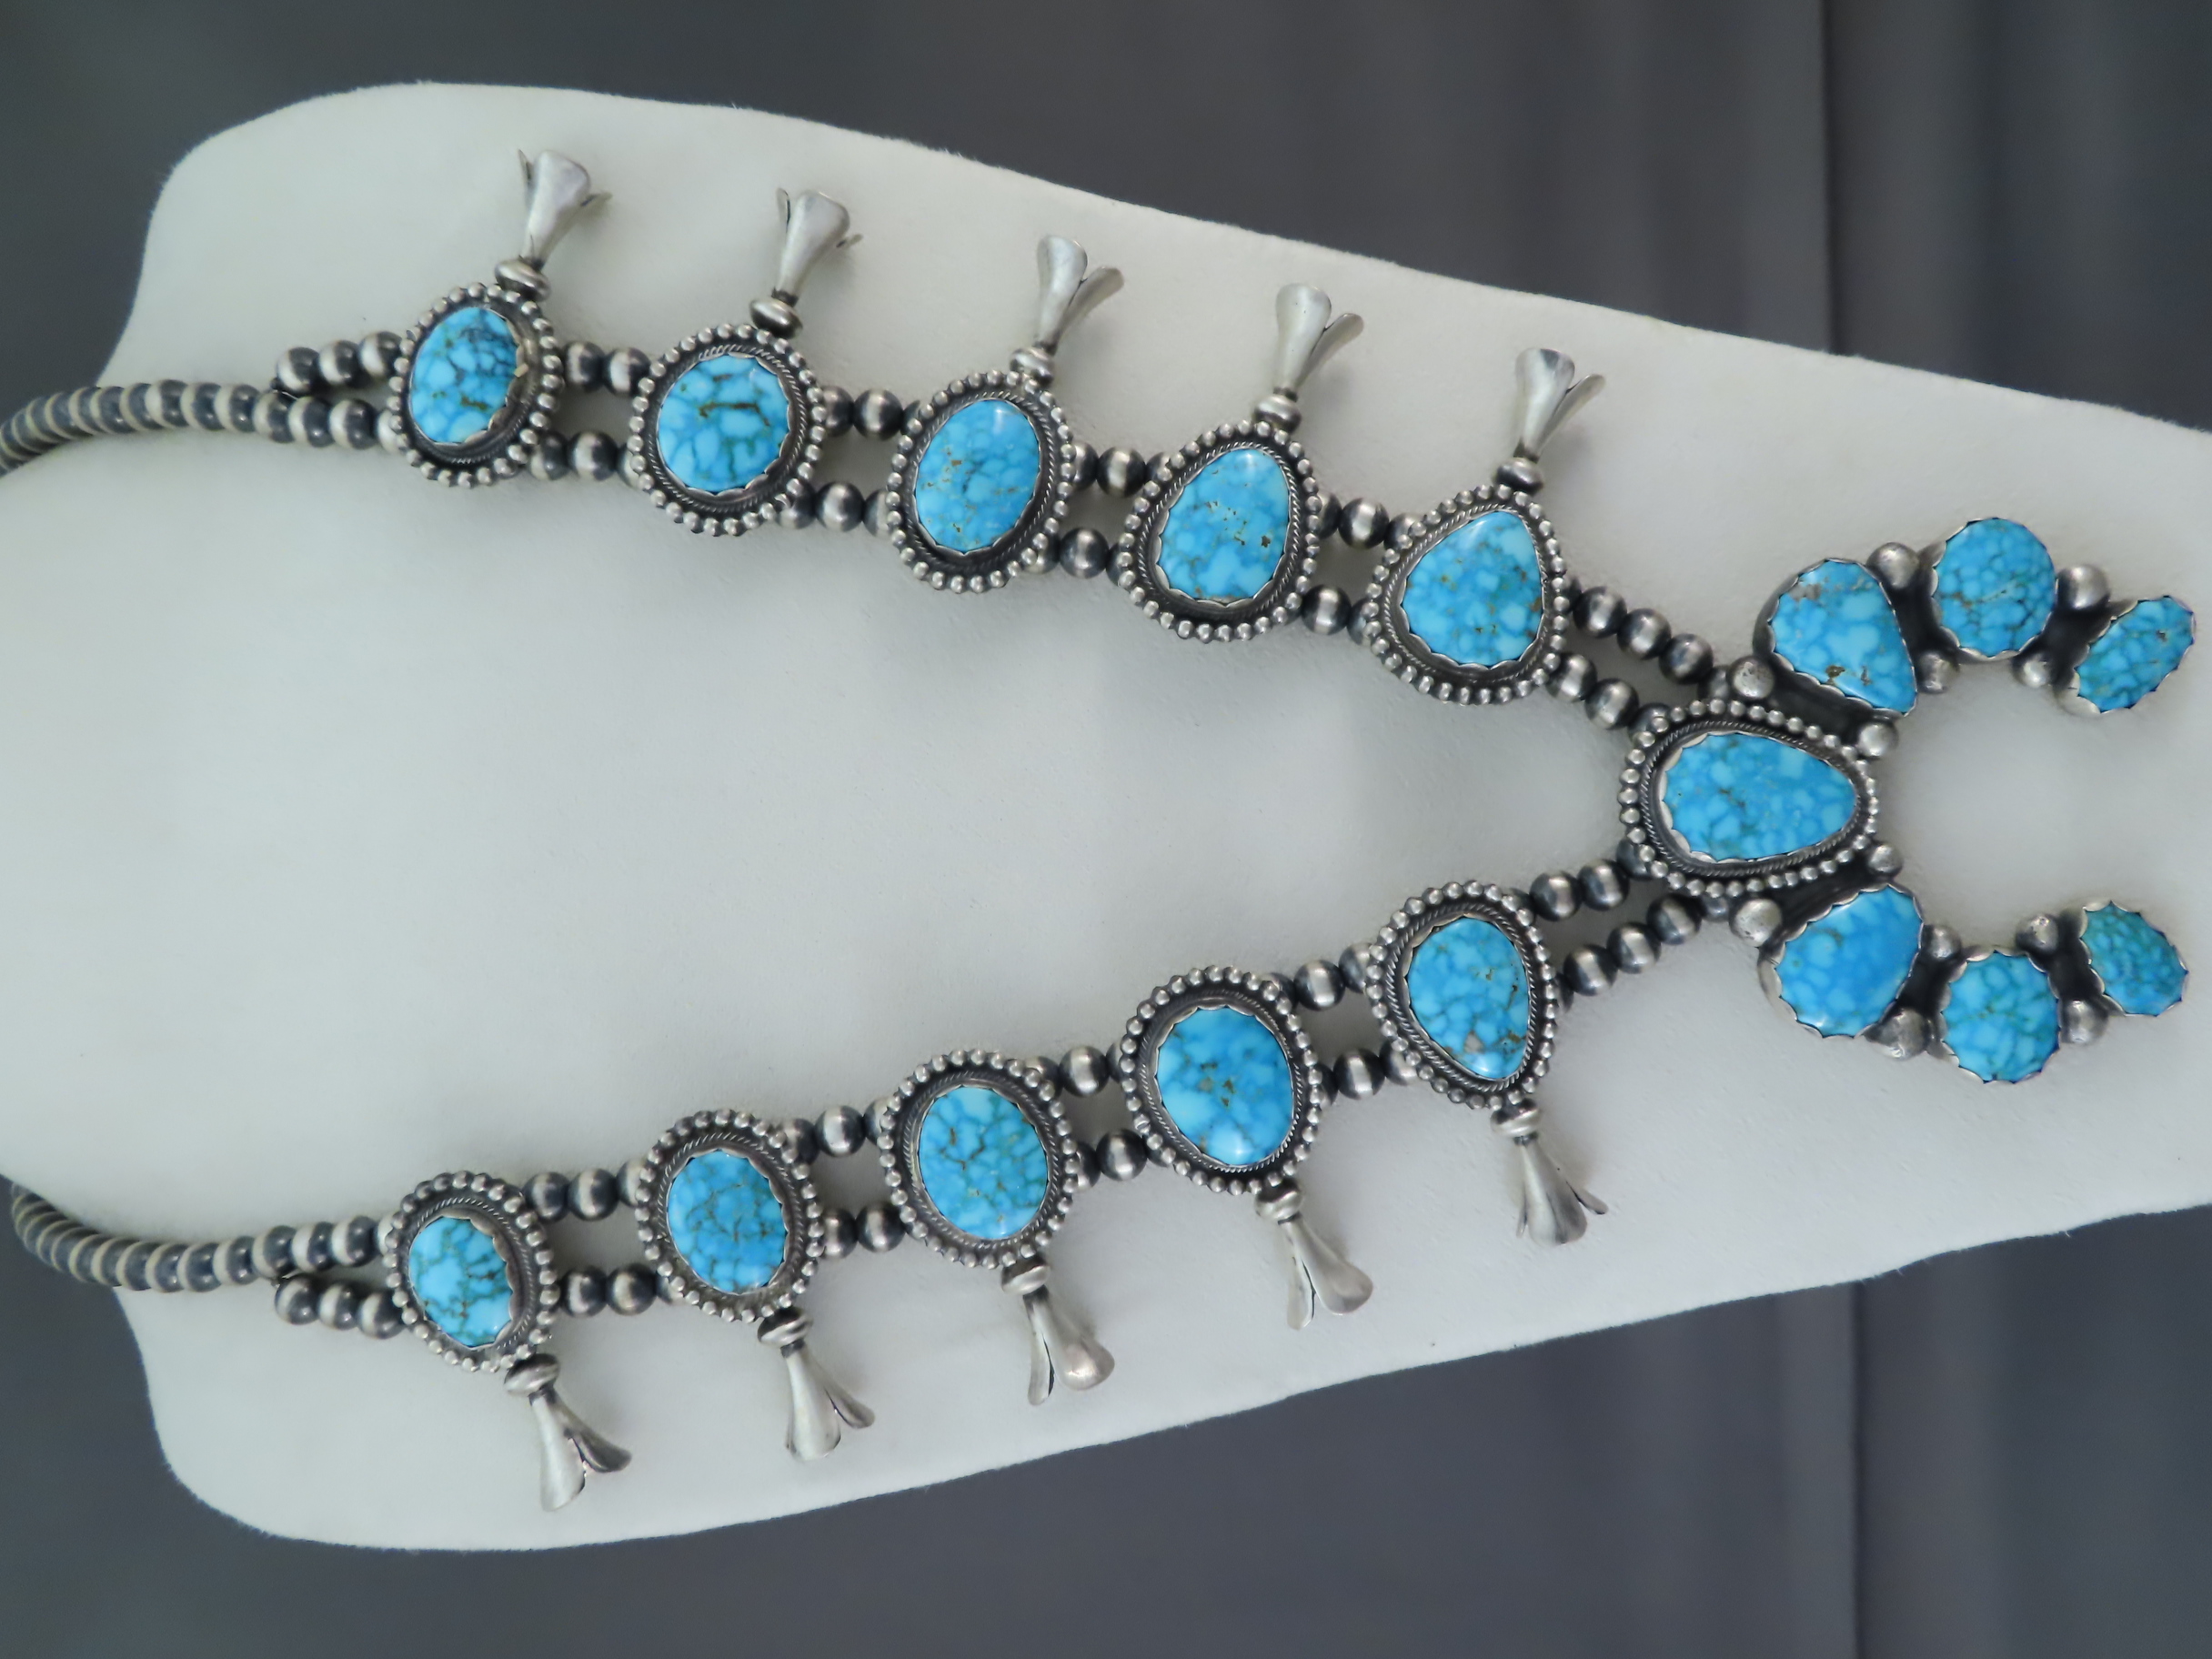 Shop Turquoise Squash - Kingman Turquoise Squash Blossom Necklace by Native American (Navajo) jeweler, Bob Becenti $4,400- FOR SALE